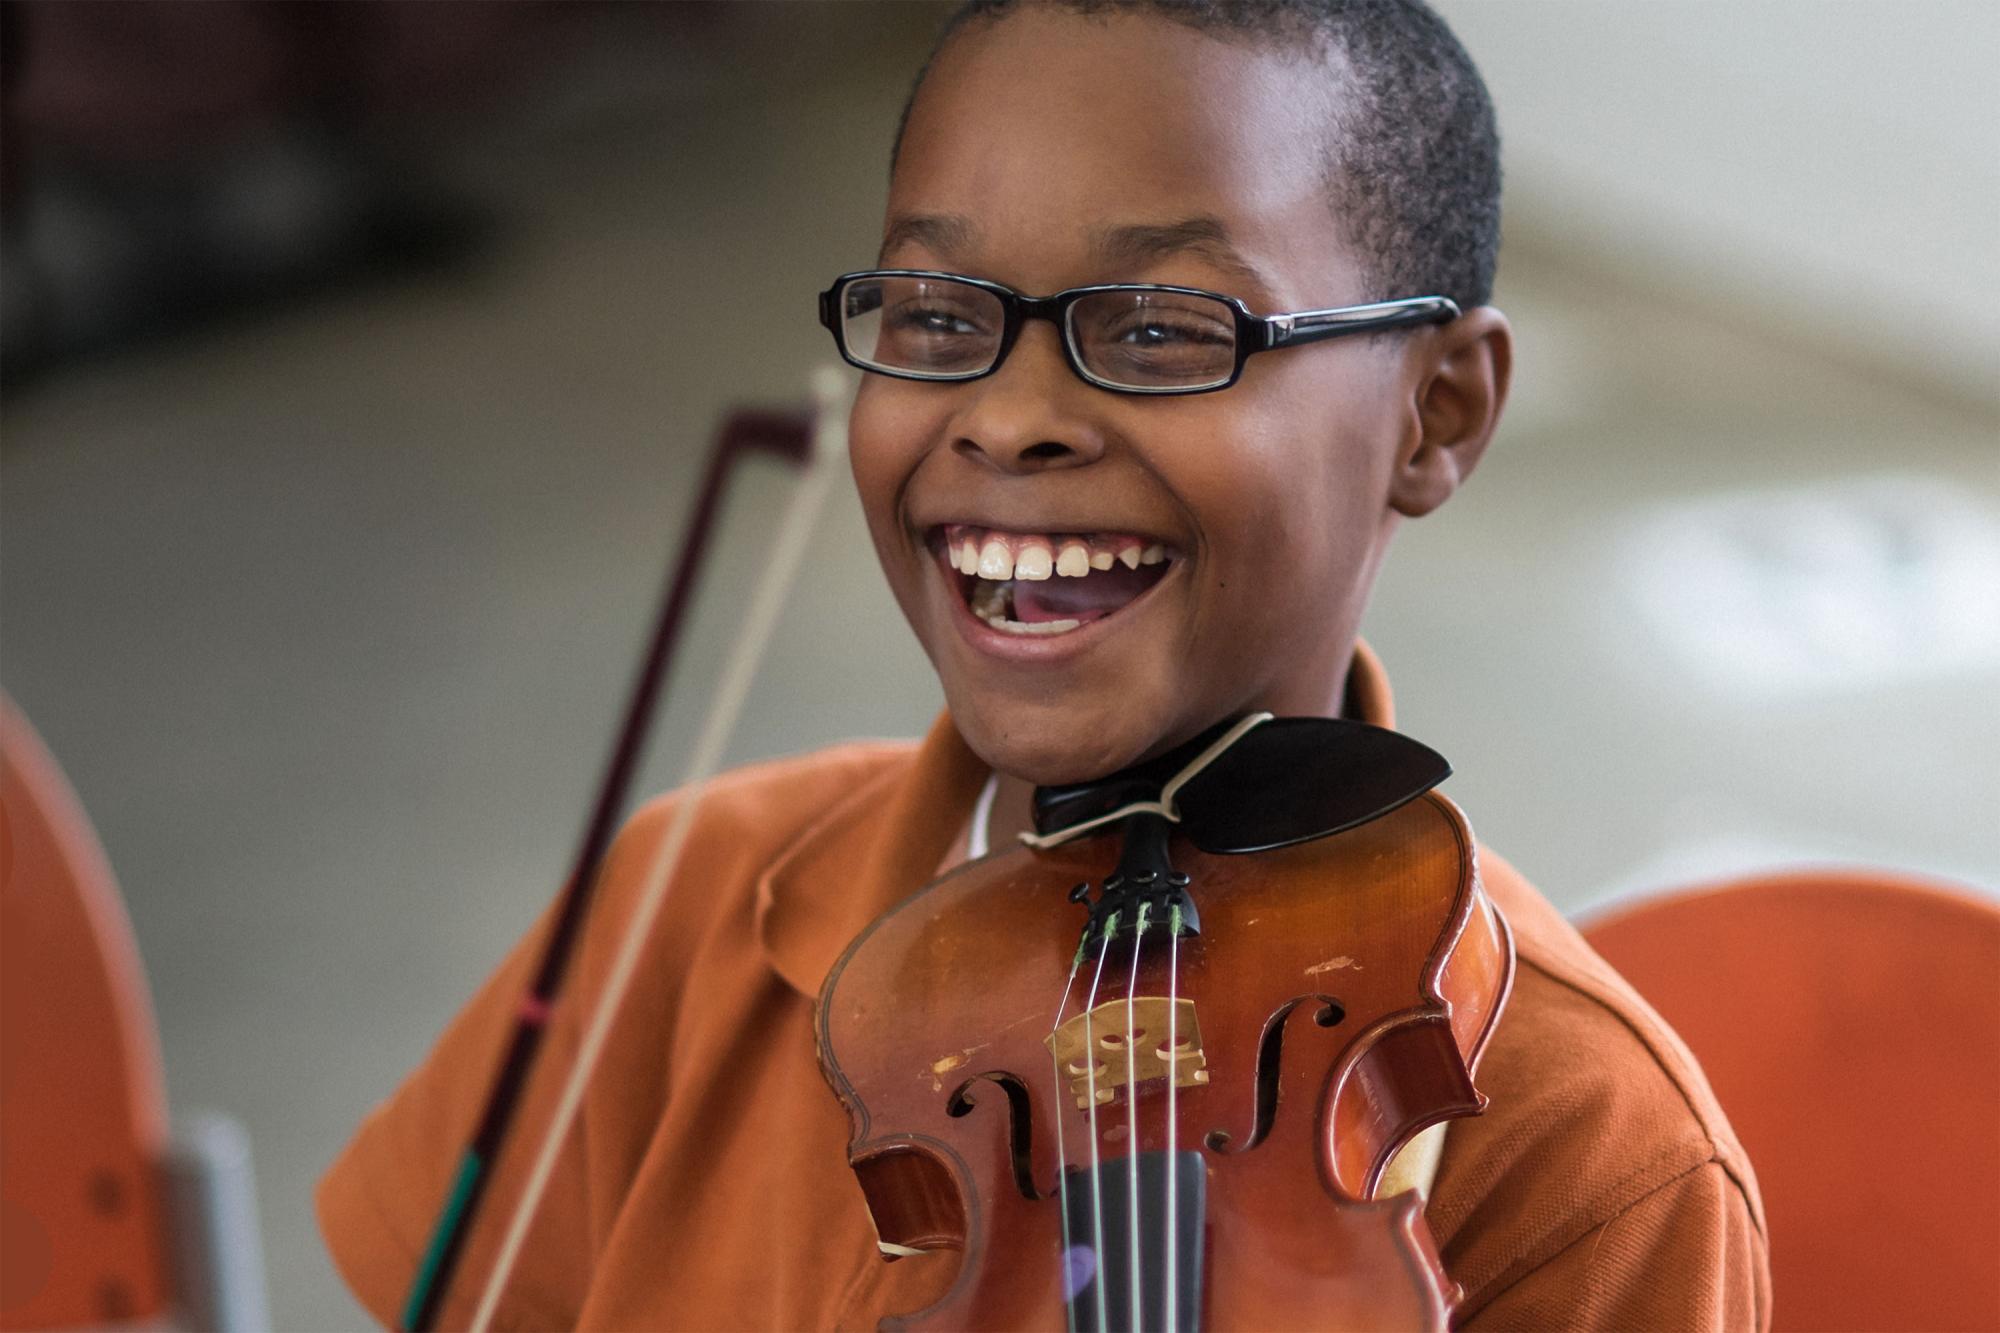 A young violin student holding his instrument in playing position, laughs gleefully during a music lesson